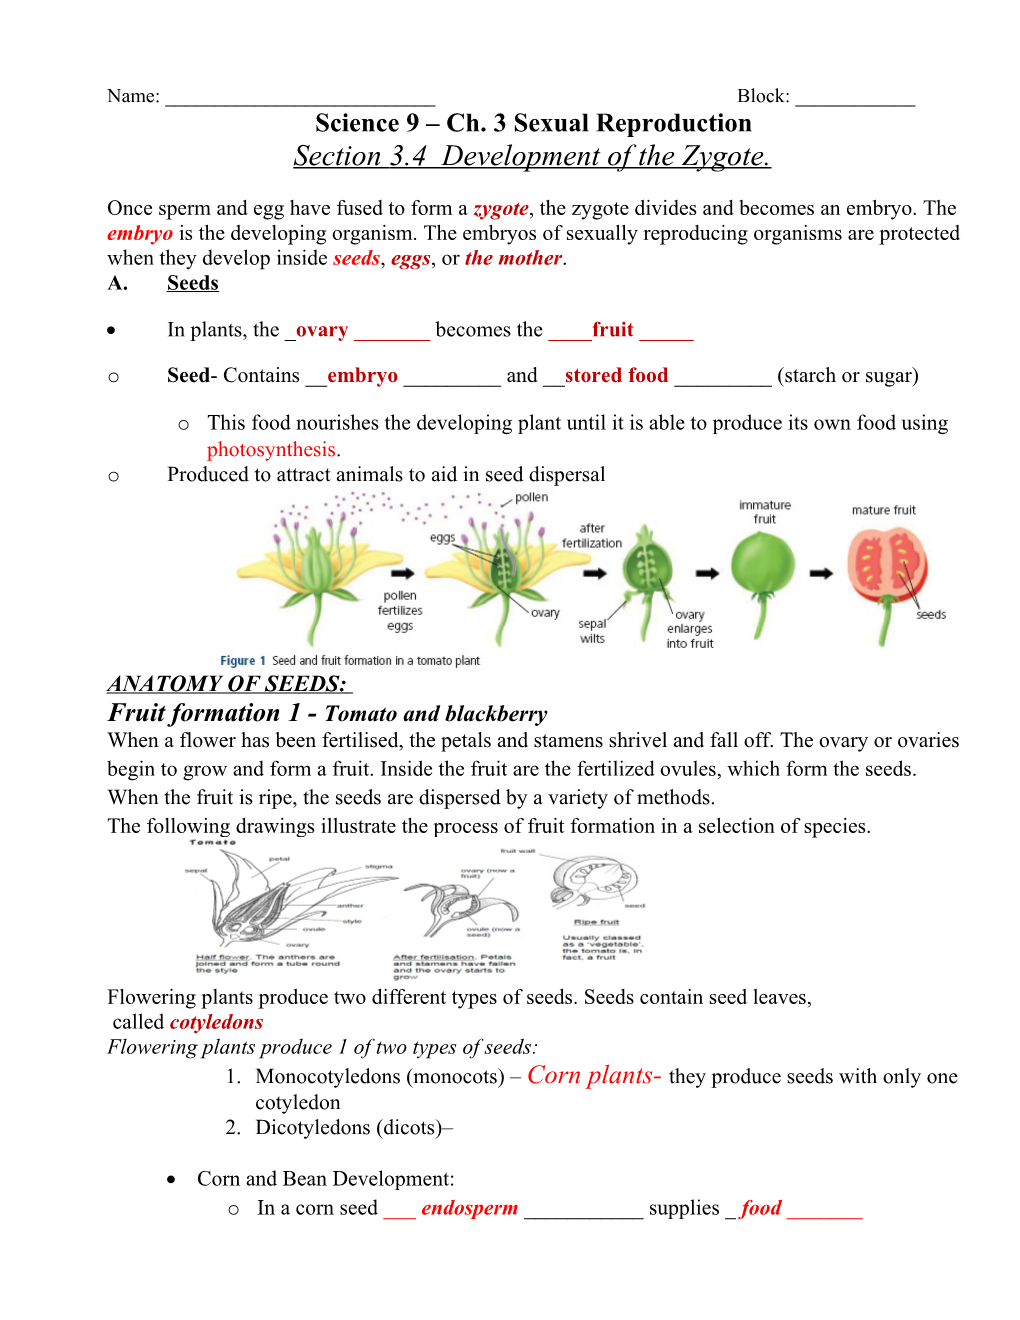 Science 9 Ch. 3 Sexual Reproduction